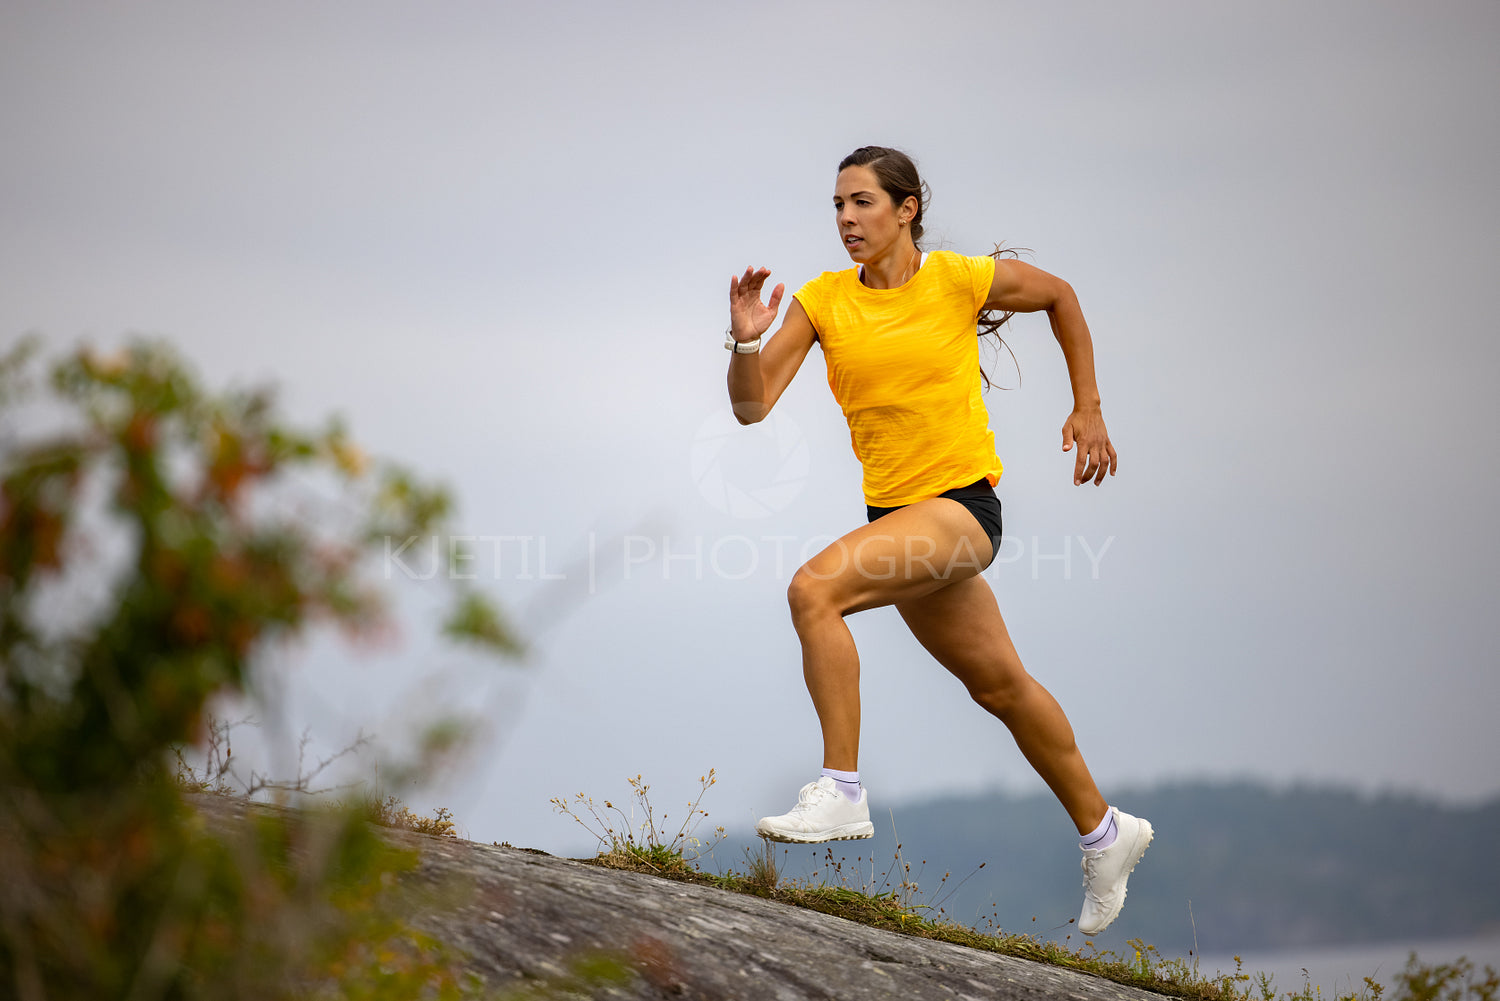 Focused fitness woman doing high-intensity running on mountainside by the sea